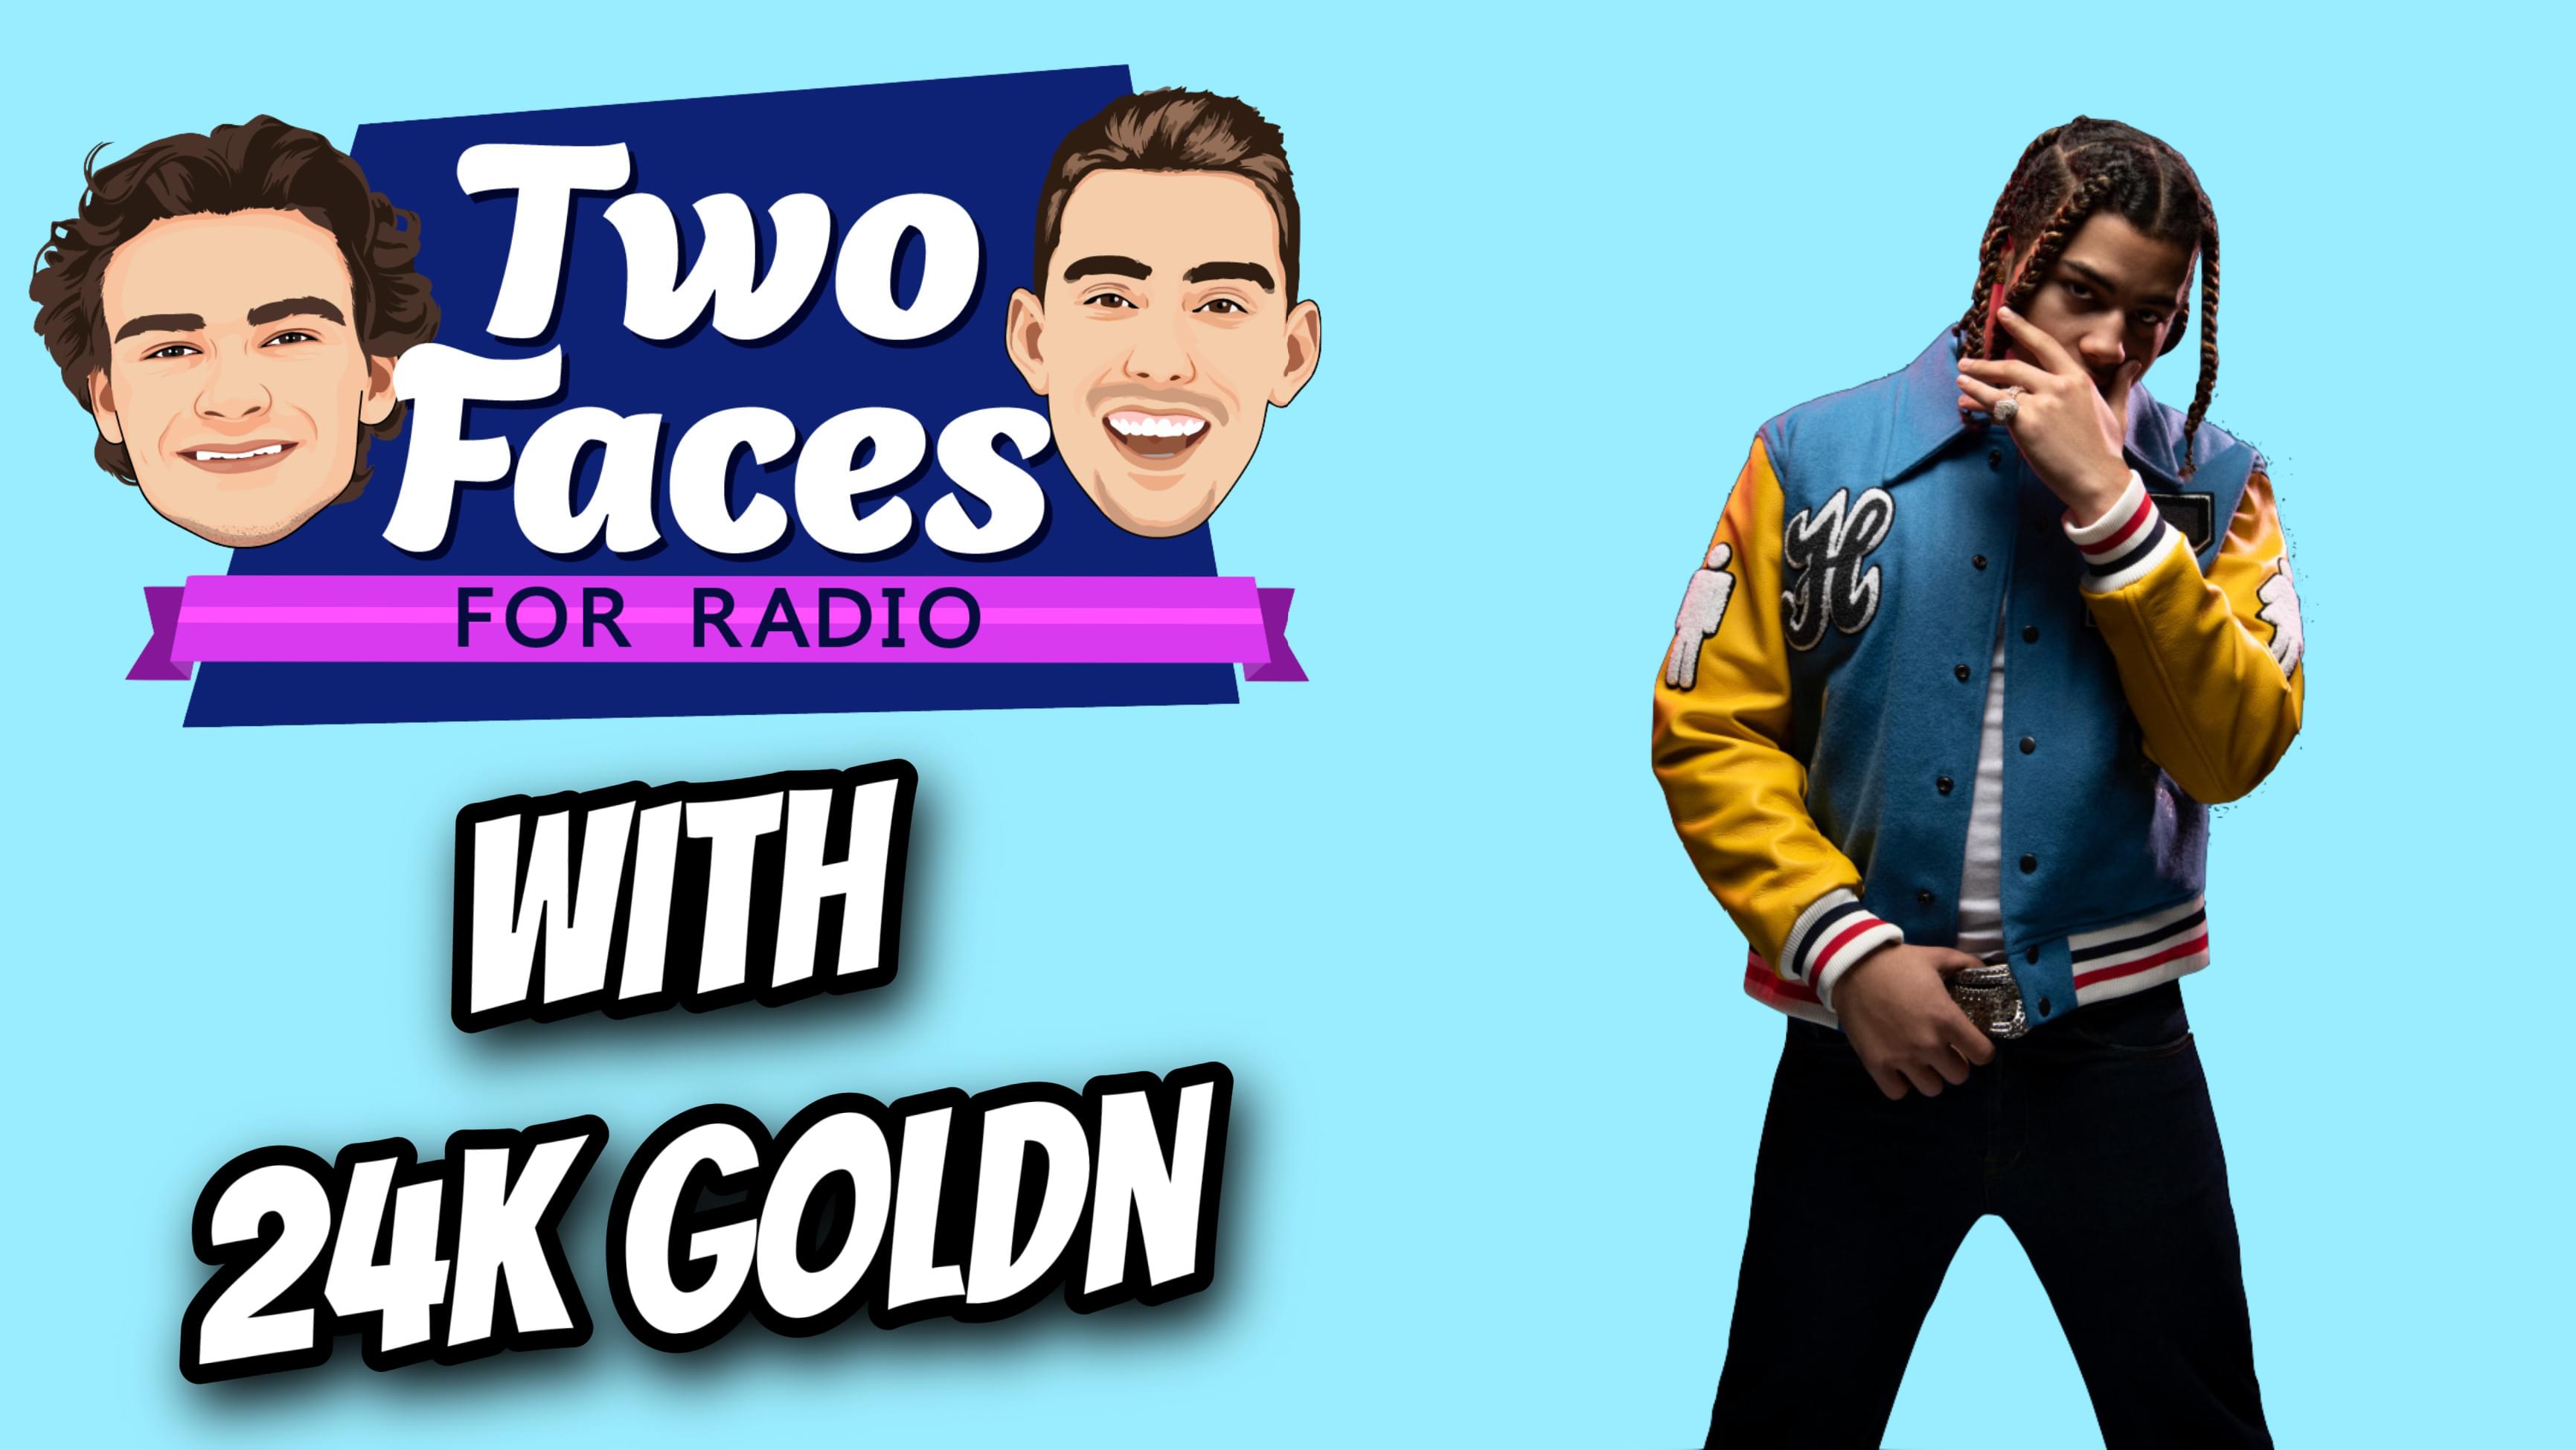 24K Goldn On The ‘Two Faces For Radio’ Podcast [WATCH]